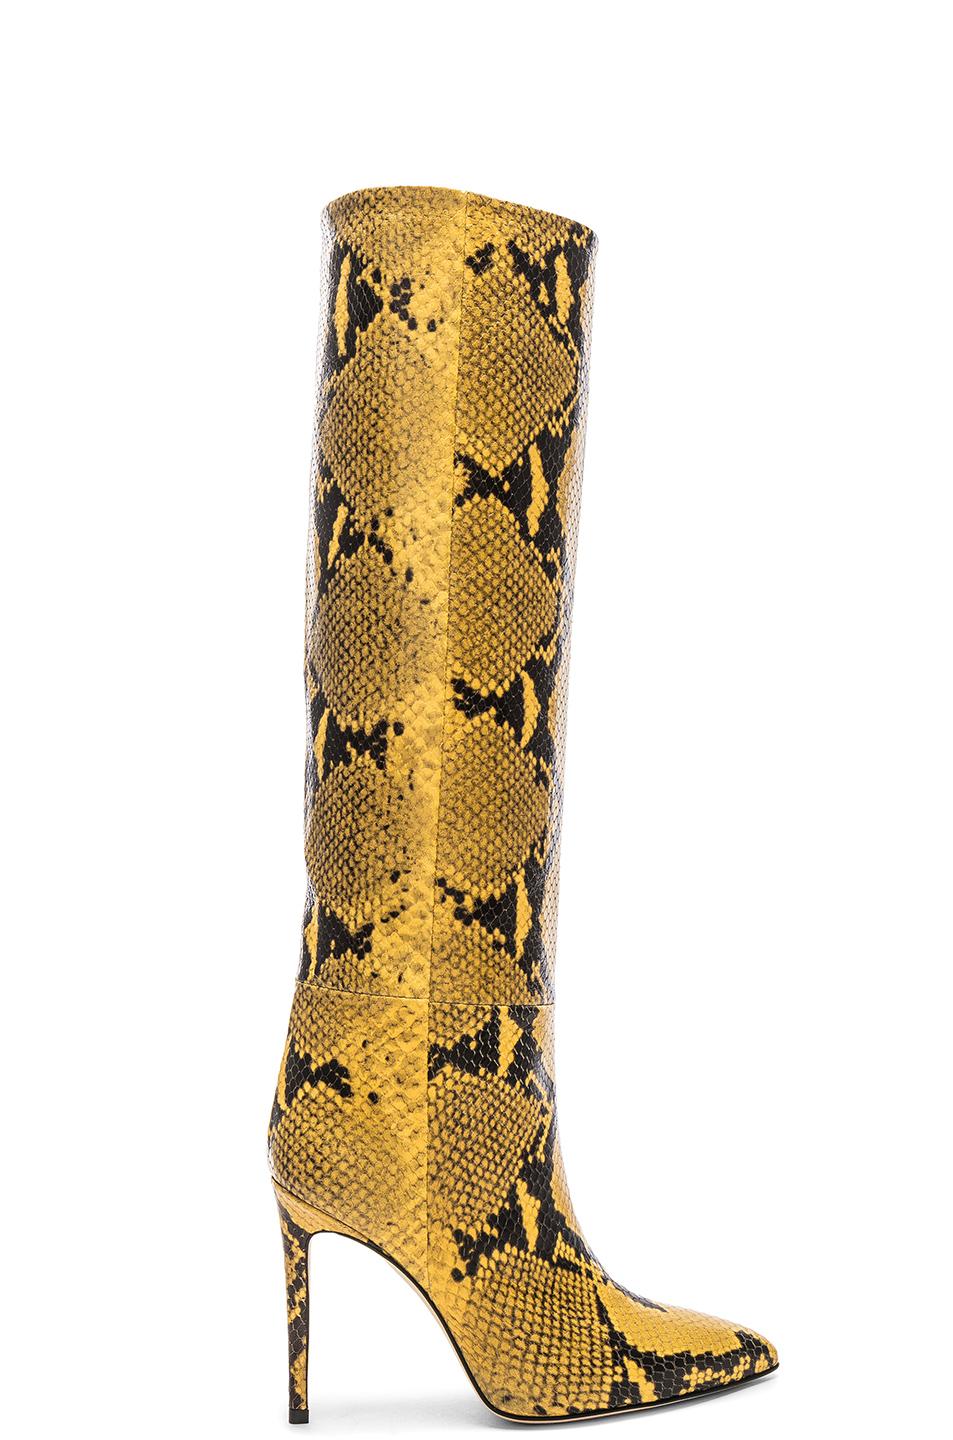 Paris Texas Leather Snakeskin Print Boots in Yellow Snake (Yellow) - Lyst